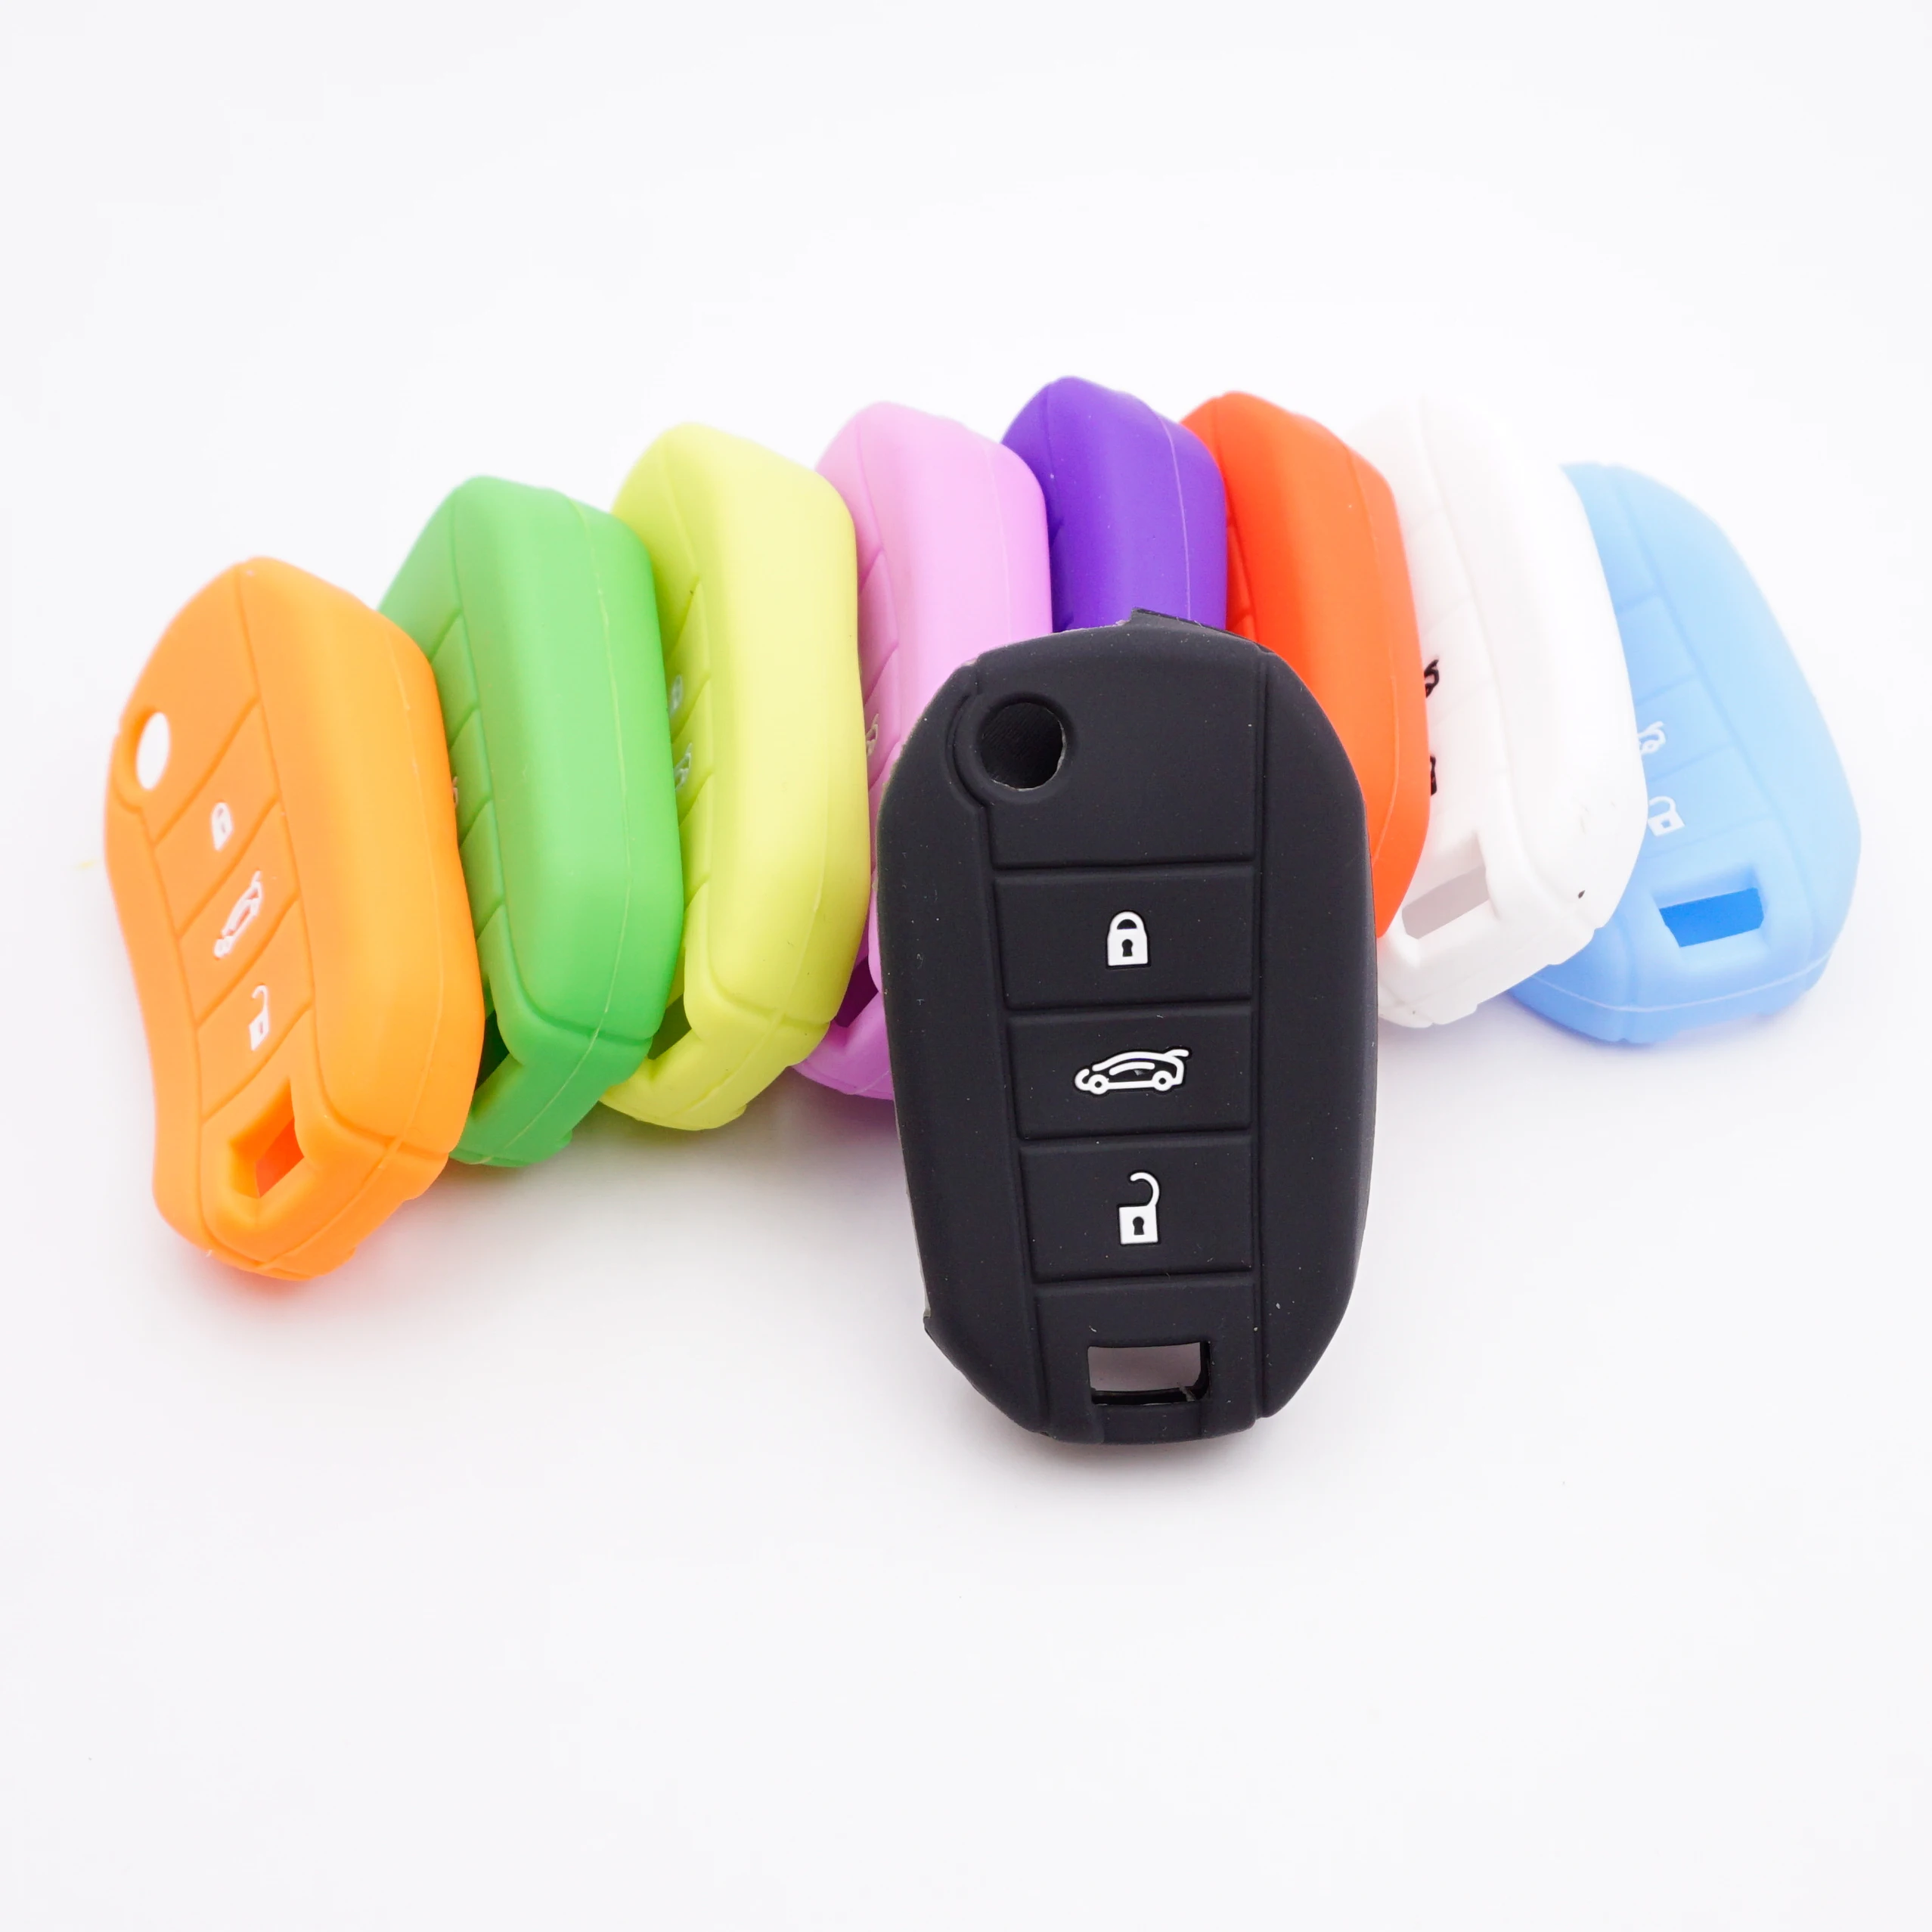 Cocolockey Car Key Cover for Citroen C4 Cactus for Peugeot 508 208 308 T9 F Floding Silicone Key Fob Remote Control Protect Bag images - 6